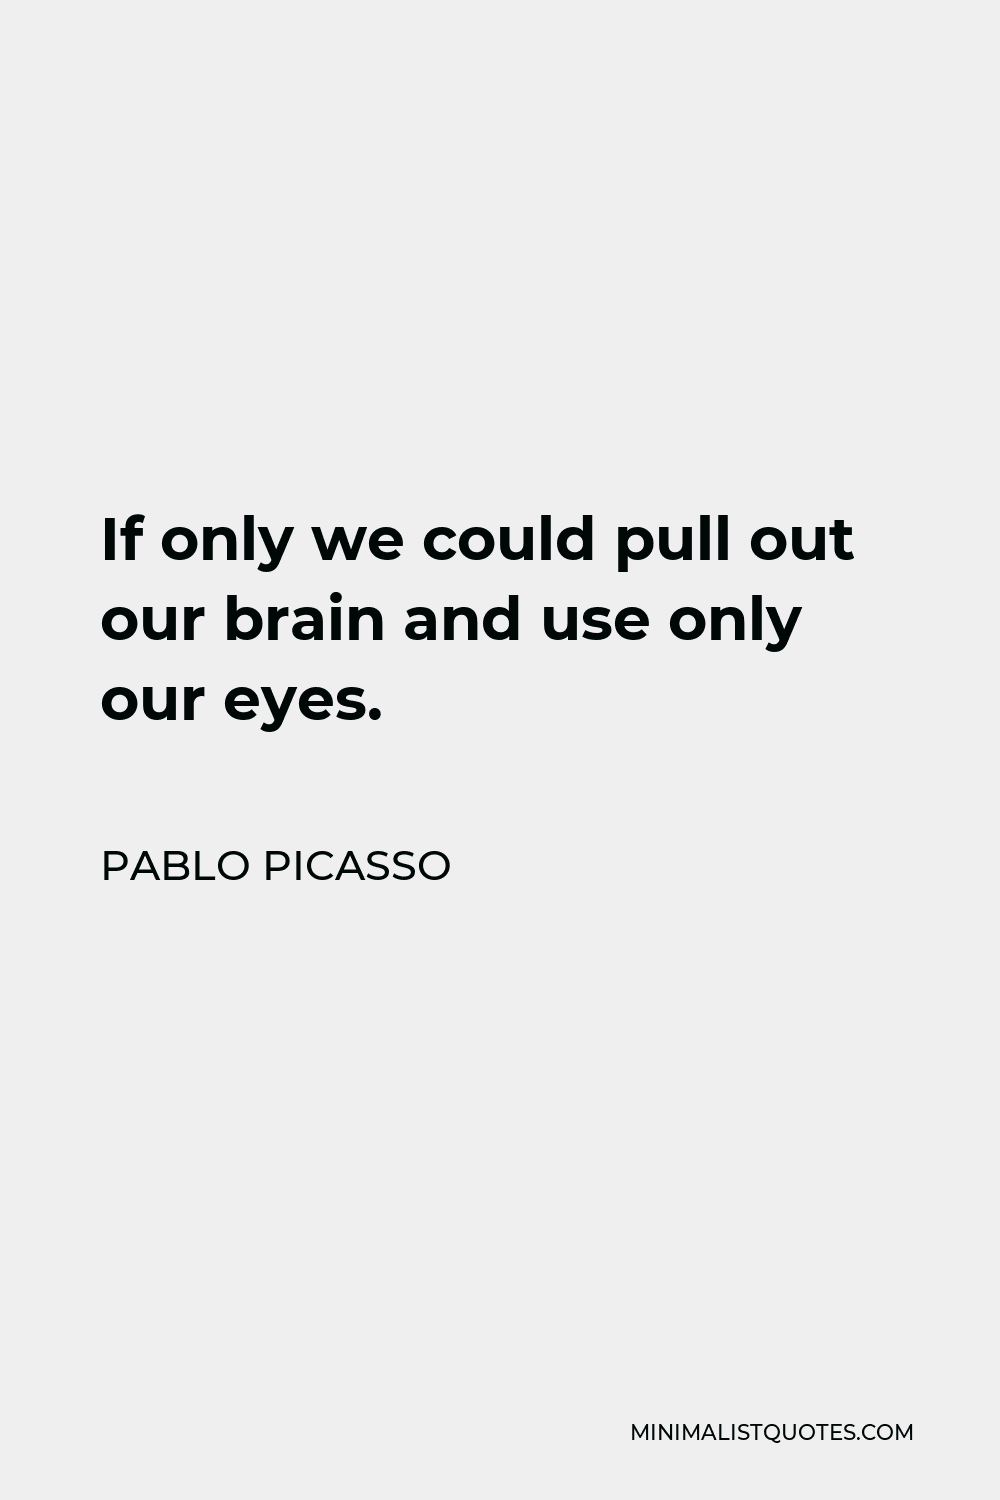 Pablo Picasso Quote - If only we could pull out our brain and use only our eyes.